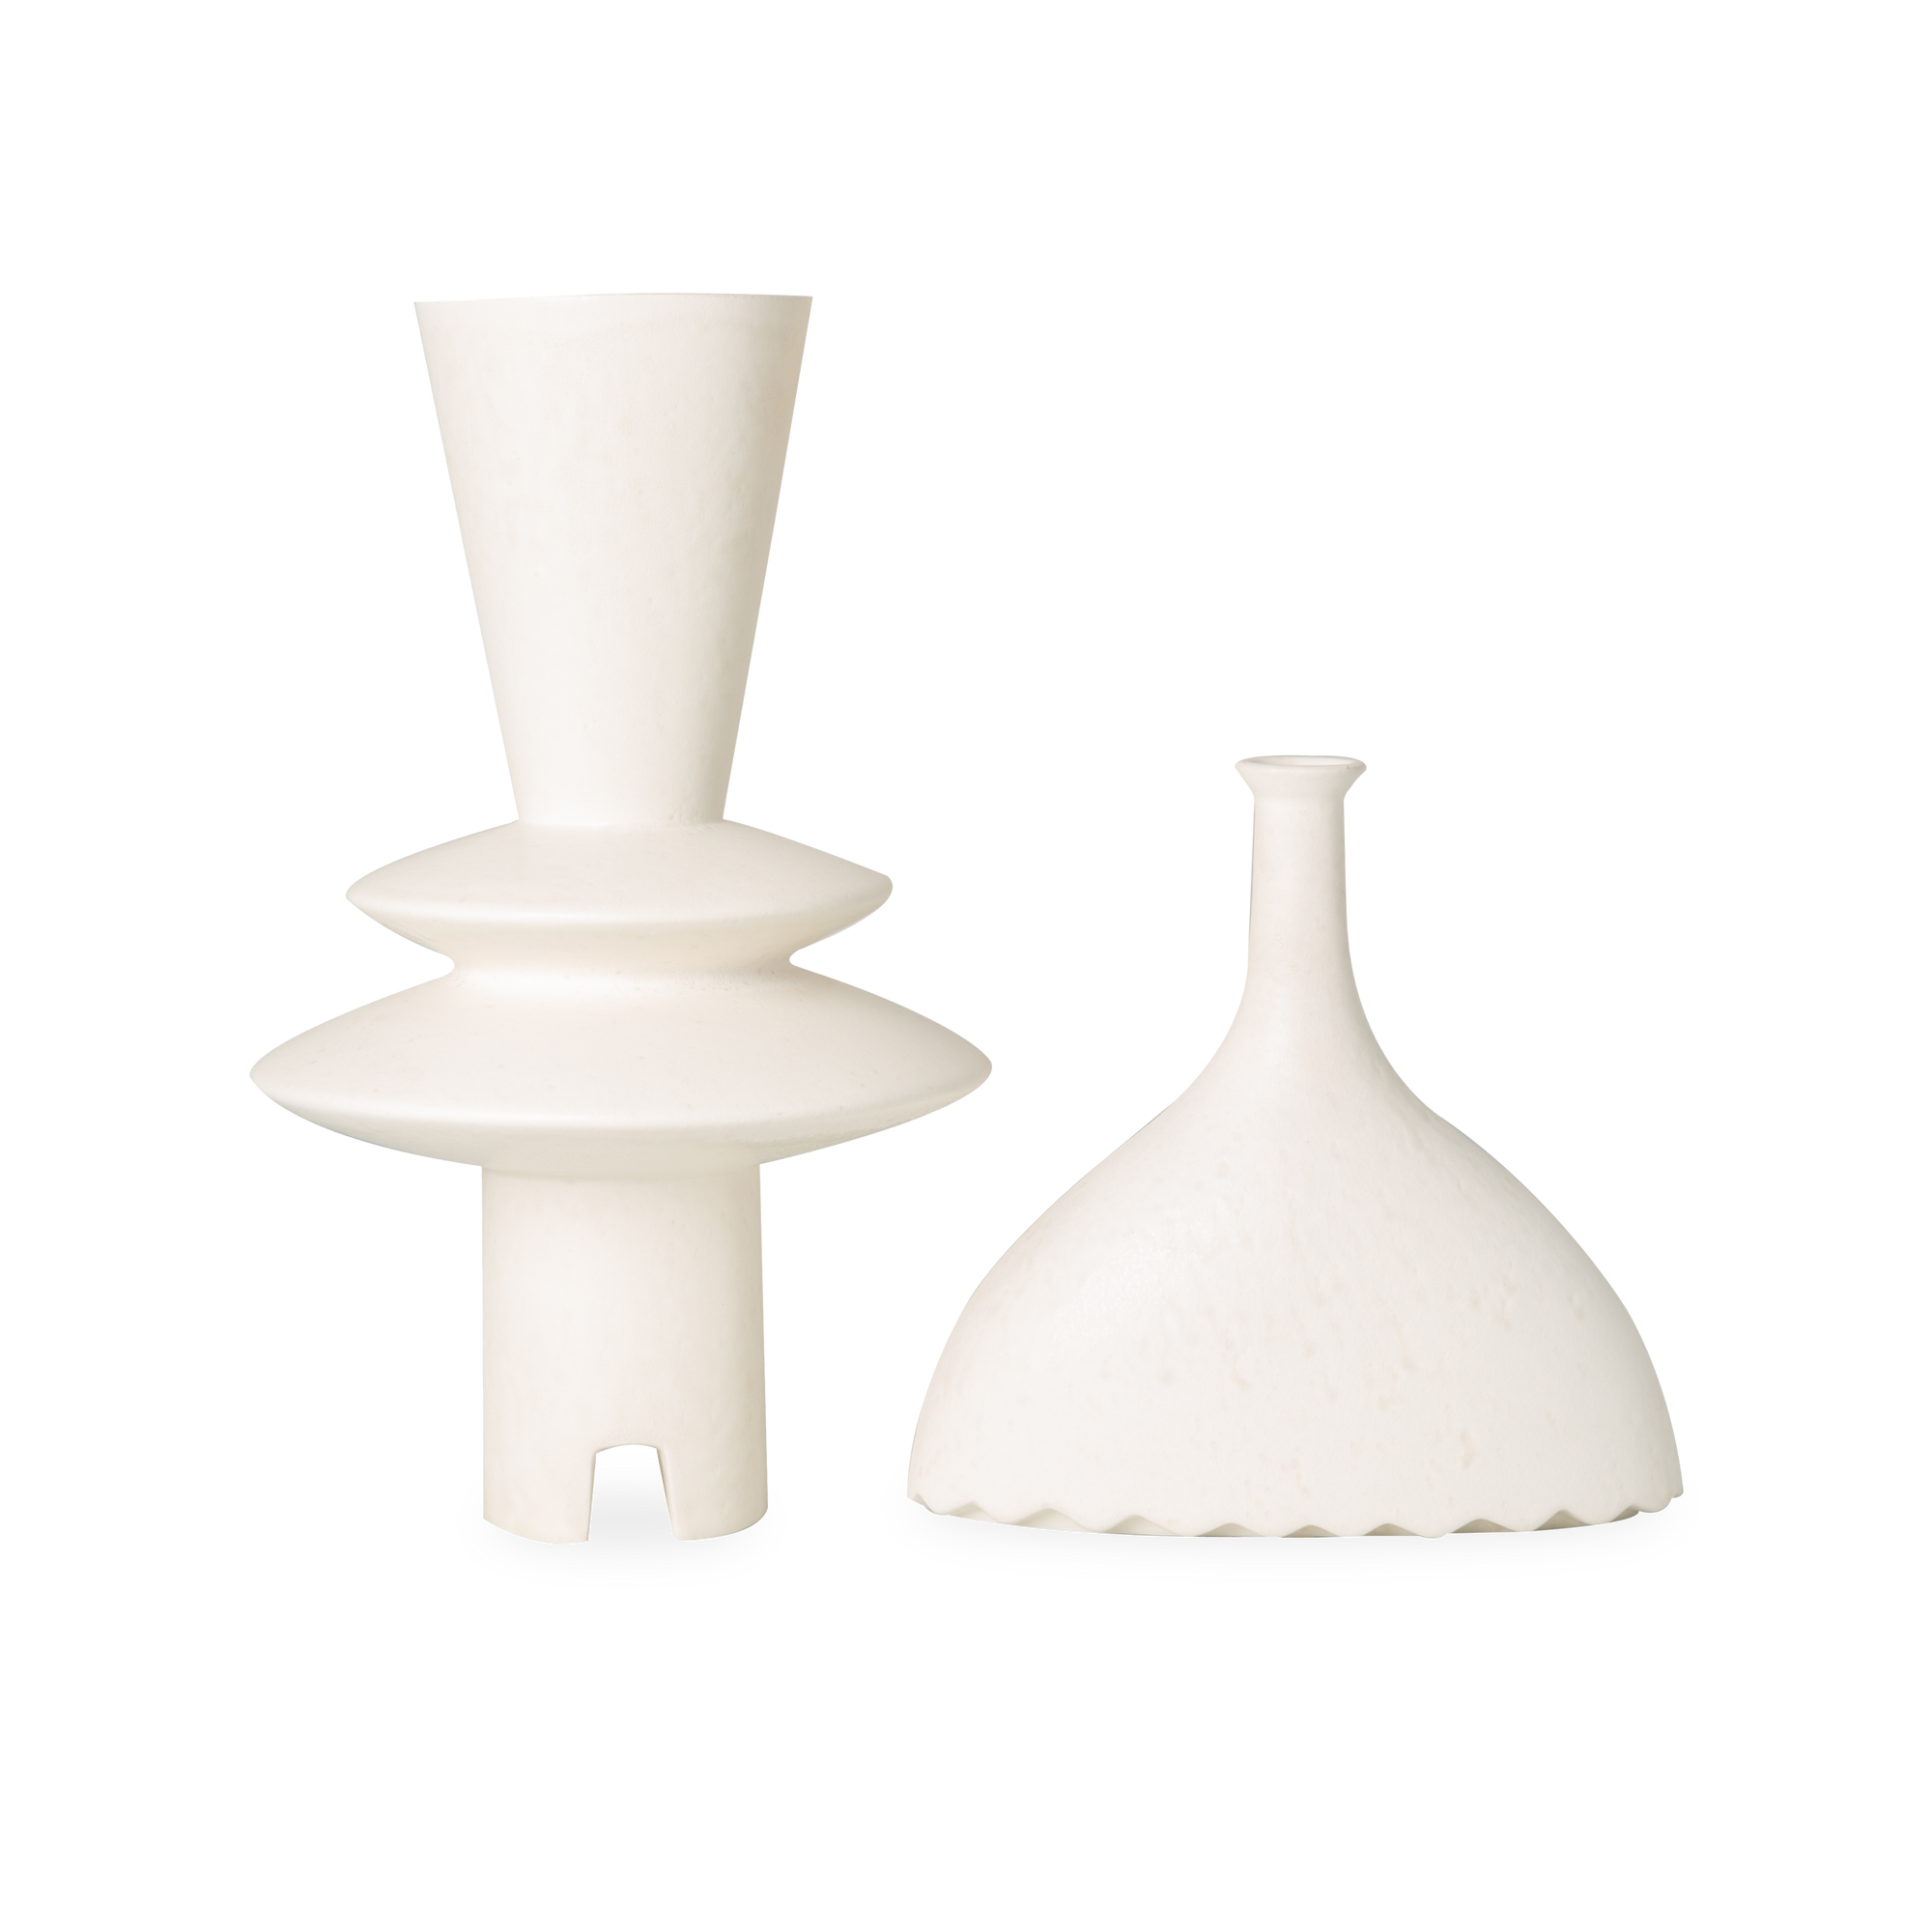 The sculptural Geometric Vases are inspired by Scandinavian design and they are equally striking individually and in a group.